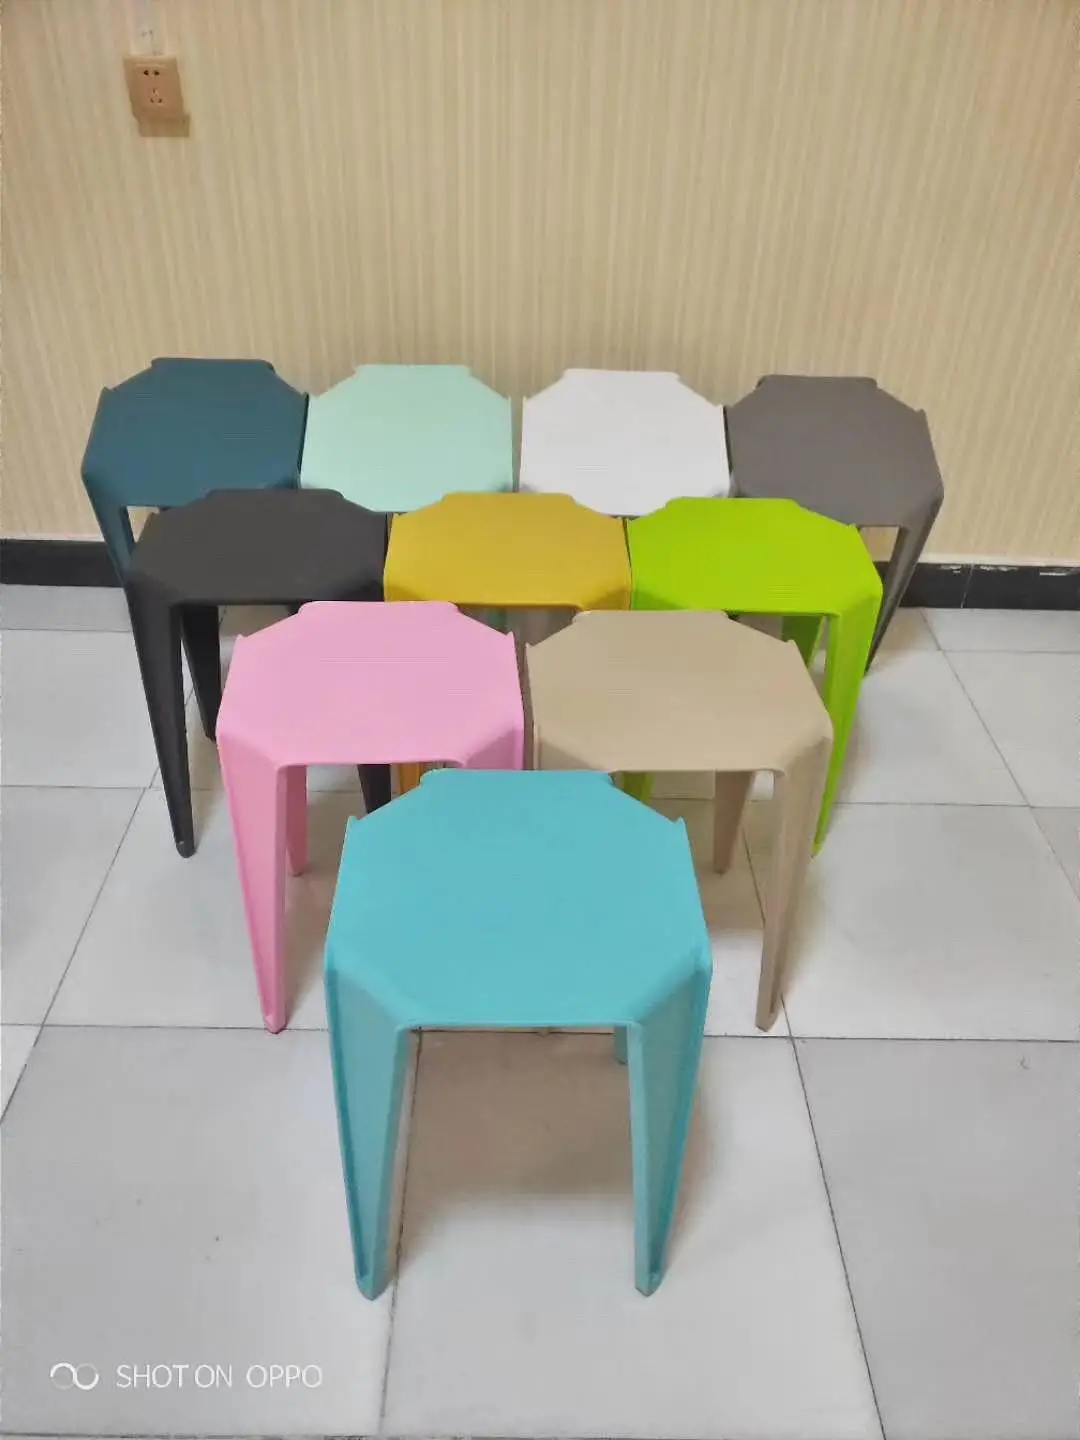 Nordic Modern Simple Plastic Thickened Household Dining Chairs Can Overlay Fashionable Small Square Benches